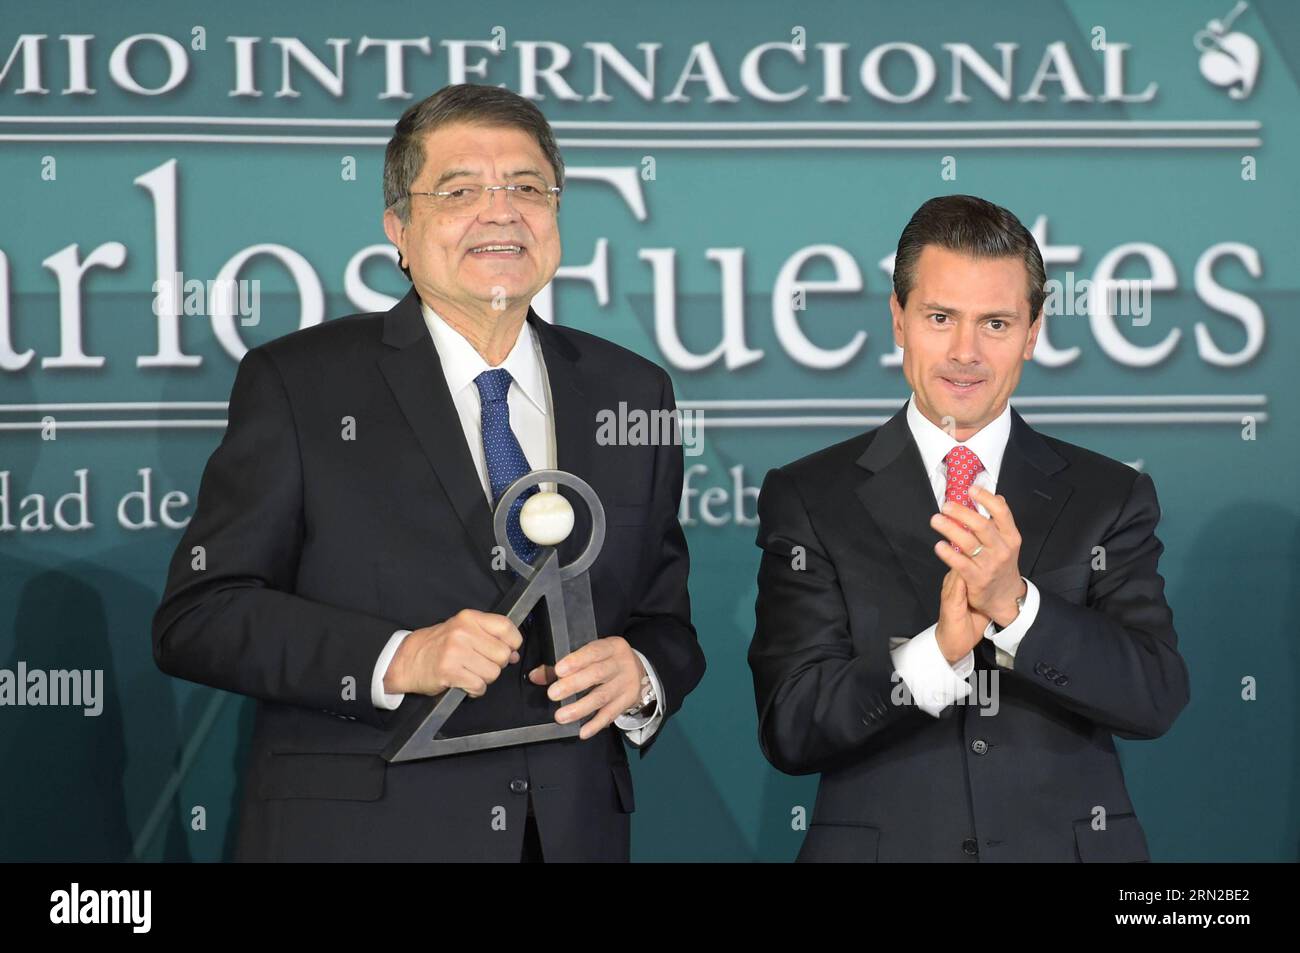 (150224) -- MEXICO CITY, Feb. 23, 2015 -- Image provided by shows Mexican President Enrique Pena Nieto (R) and Nicaragua s writer Sergio Ramirez attending the awarding ceremony of the Carlos Fuentes International Award for Literary Creation in Spanish Language at the National Museum of Antropology and History in Mexico City Feb. 23, 2015. ) MEXICO-MEXICO CITY-POLITICS-PENA NIETO MEXICO SxPRESIDENCY PUBLICATIONxNOTxINxCHN   Mexico City Feb 23 2015 Image provided by Shows MEXICAN President Enrique Pena Nieto r and Nicaragua S Writer Sergio Ramirez attending The awarding Ceremony of The Carlos Fu Stock Photo